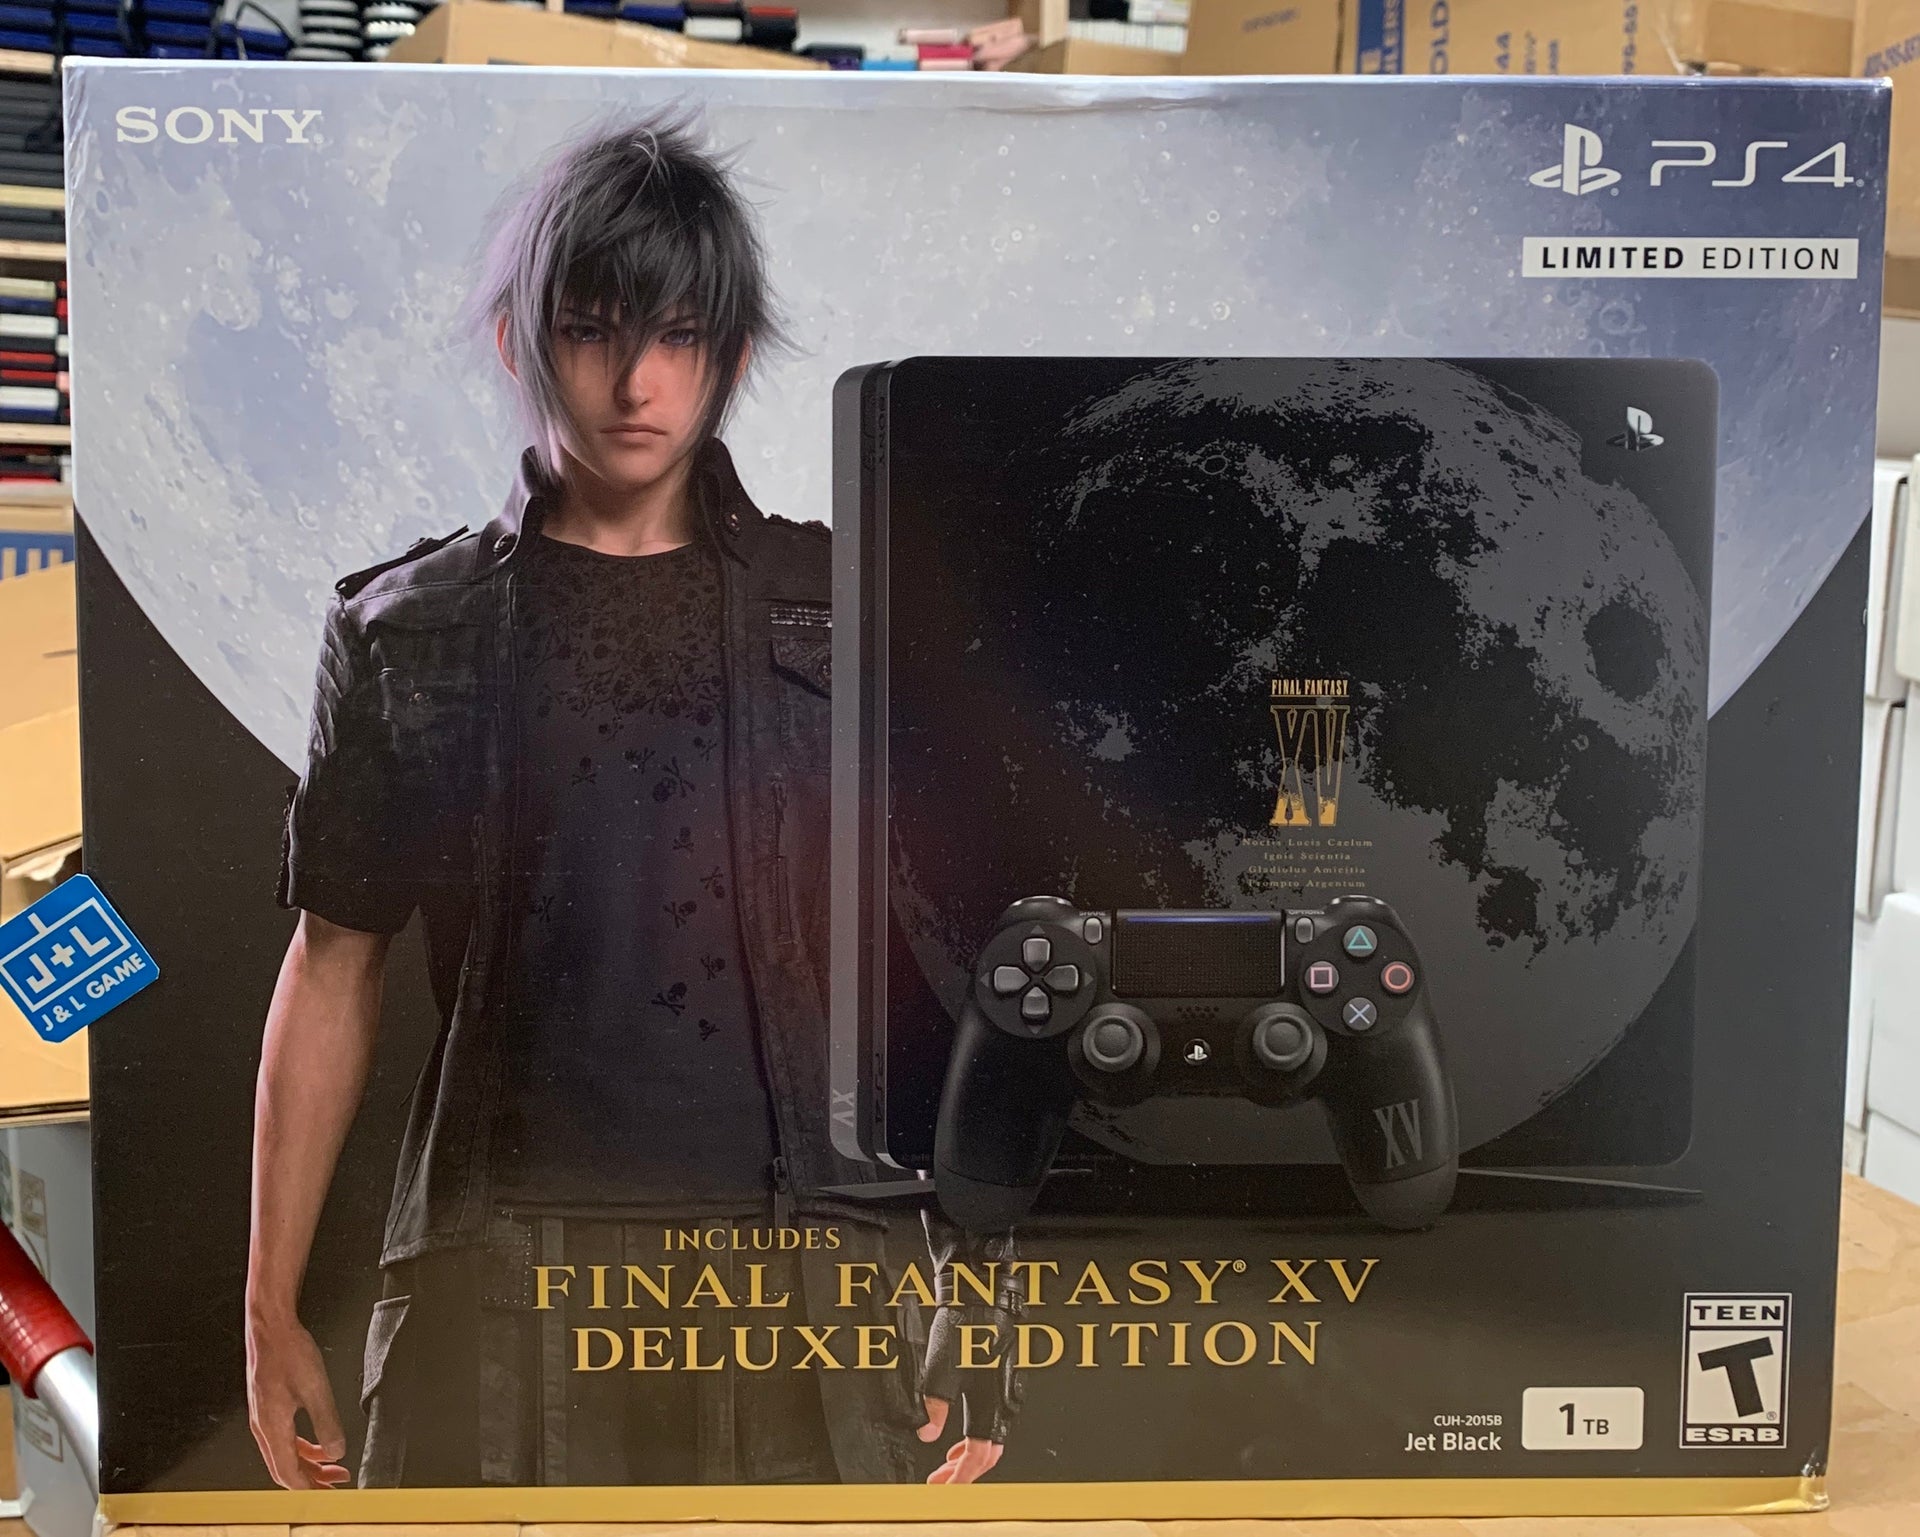 Playstation 4 Slim Console, 1TB Final Fantasy XV LE (No Game), Discounted -  CeX (UK): - Buy, Sell, Donate